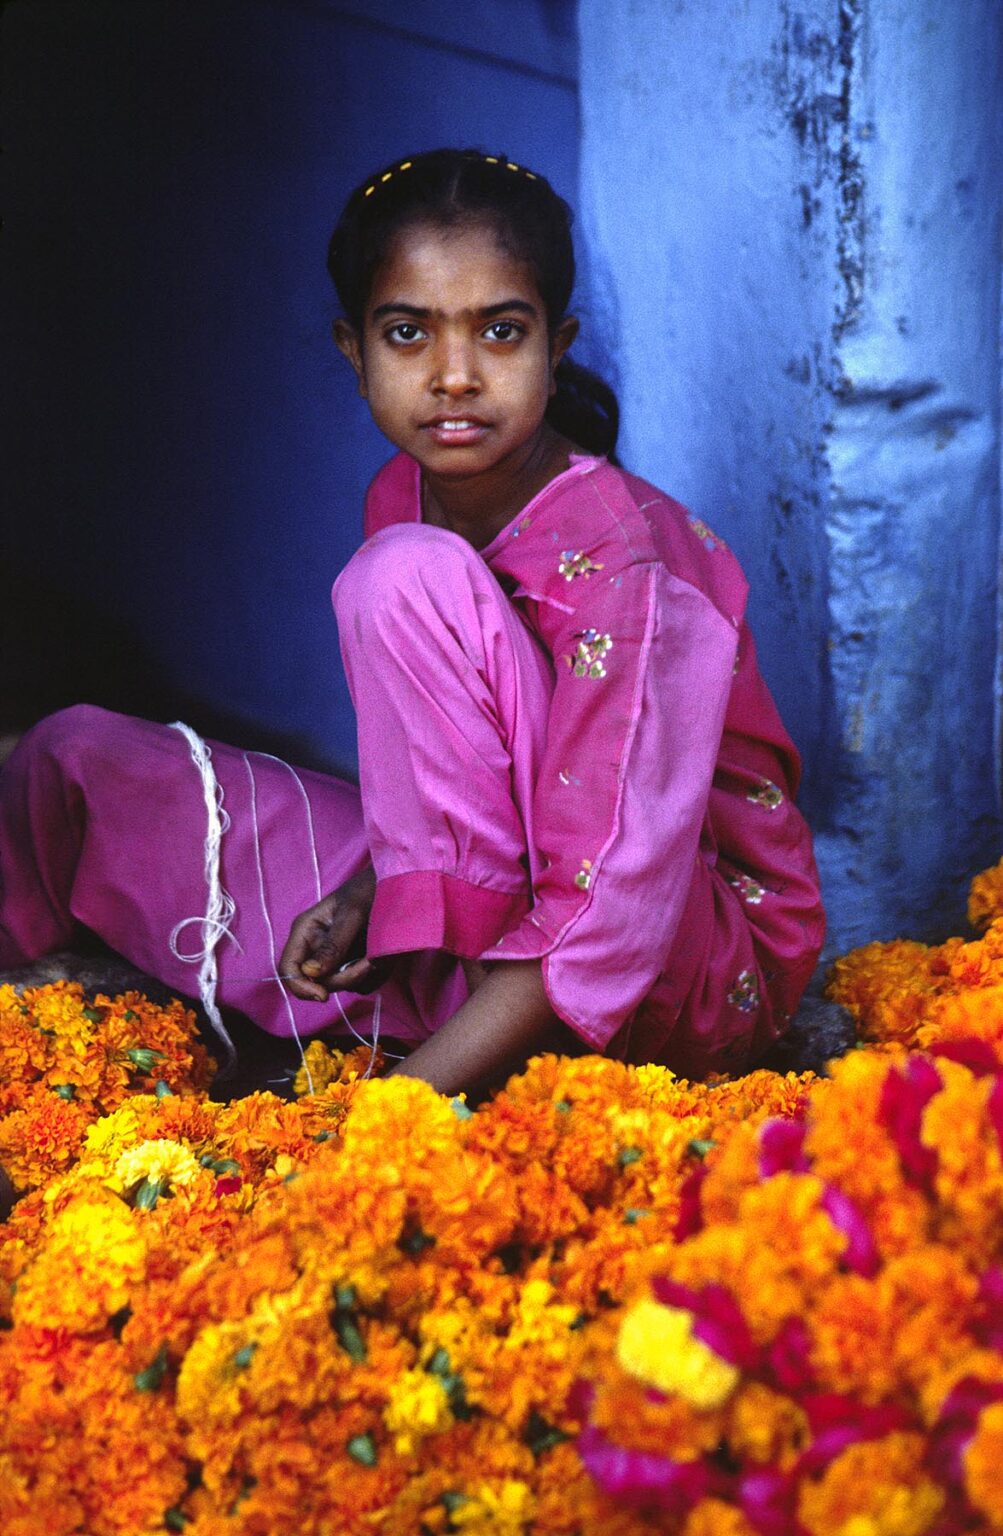 RAJASTHANI GIRL sits in front of a pile of orange CARNATION FLOWERS - RAJASTHAN, INDIA